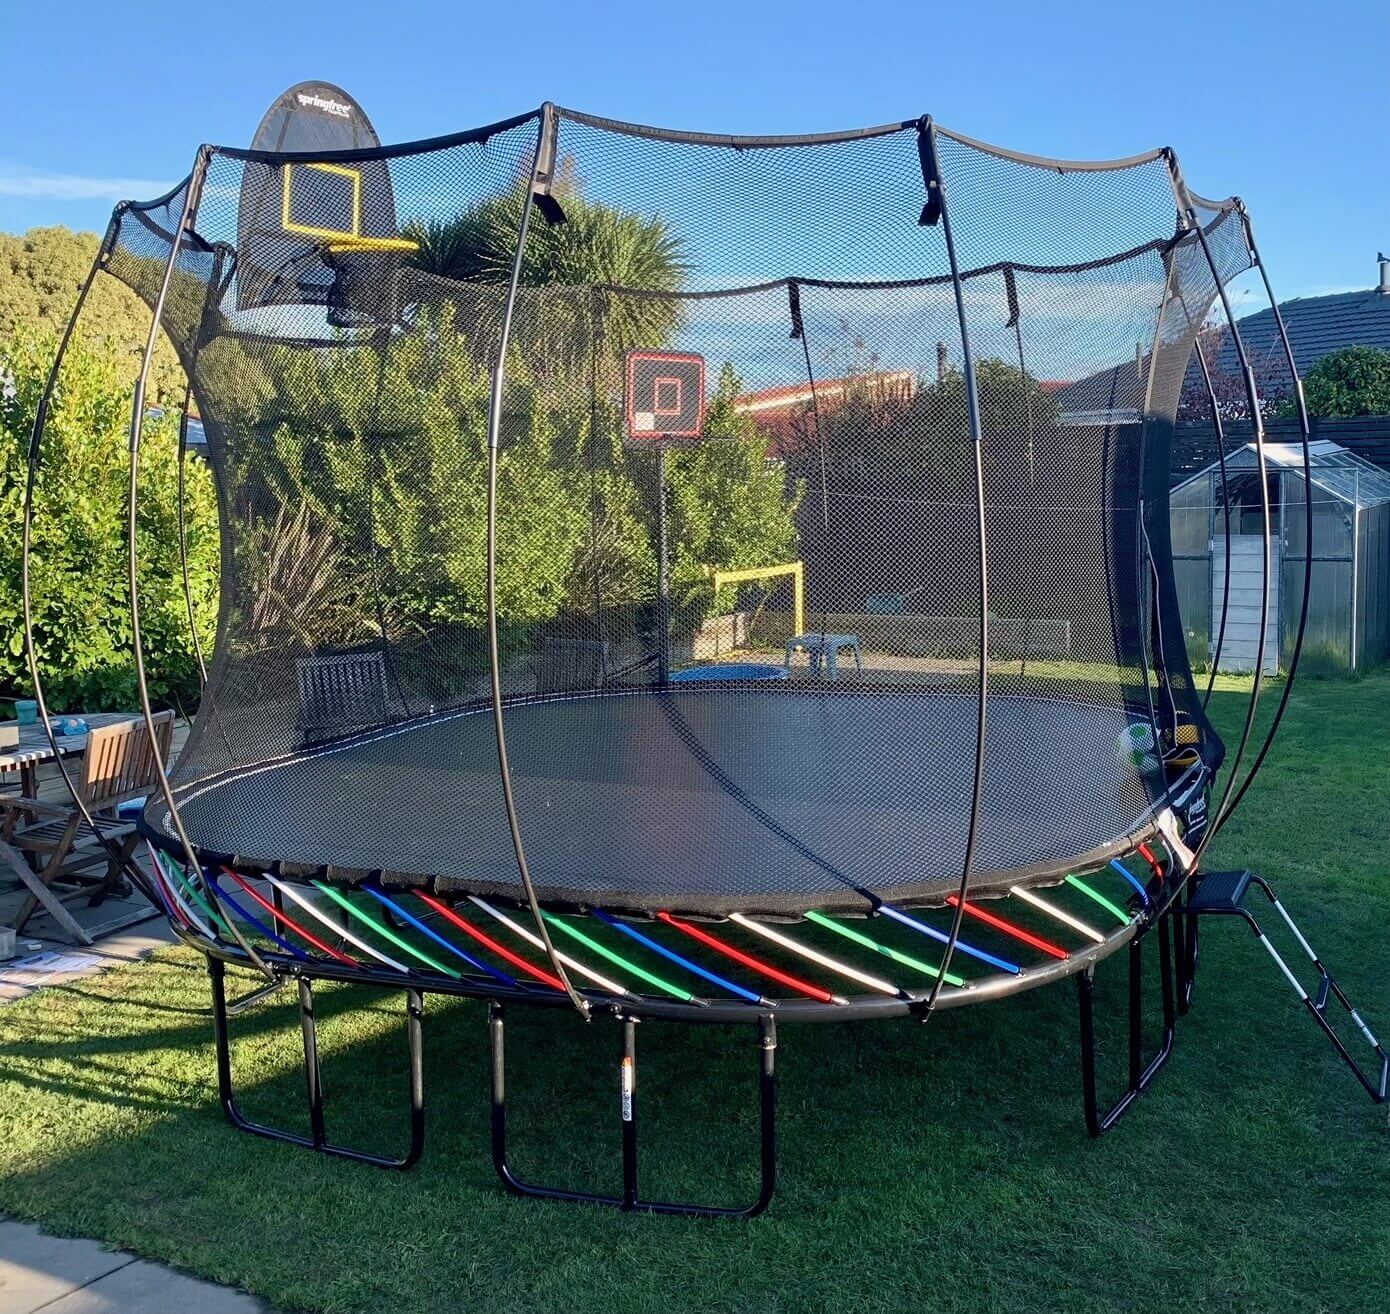 Large Square Springfree Trampoline with coloured sleeves